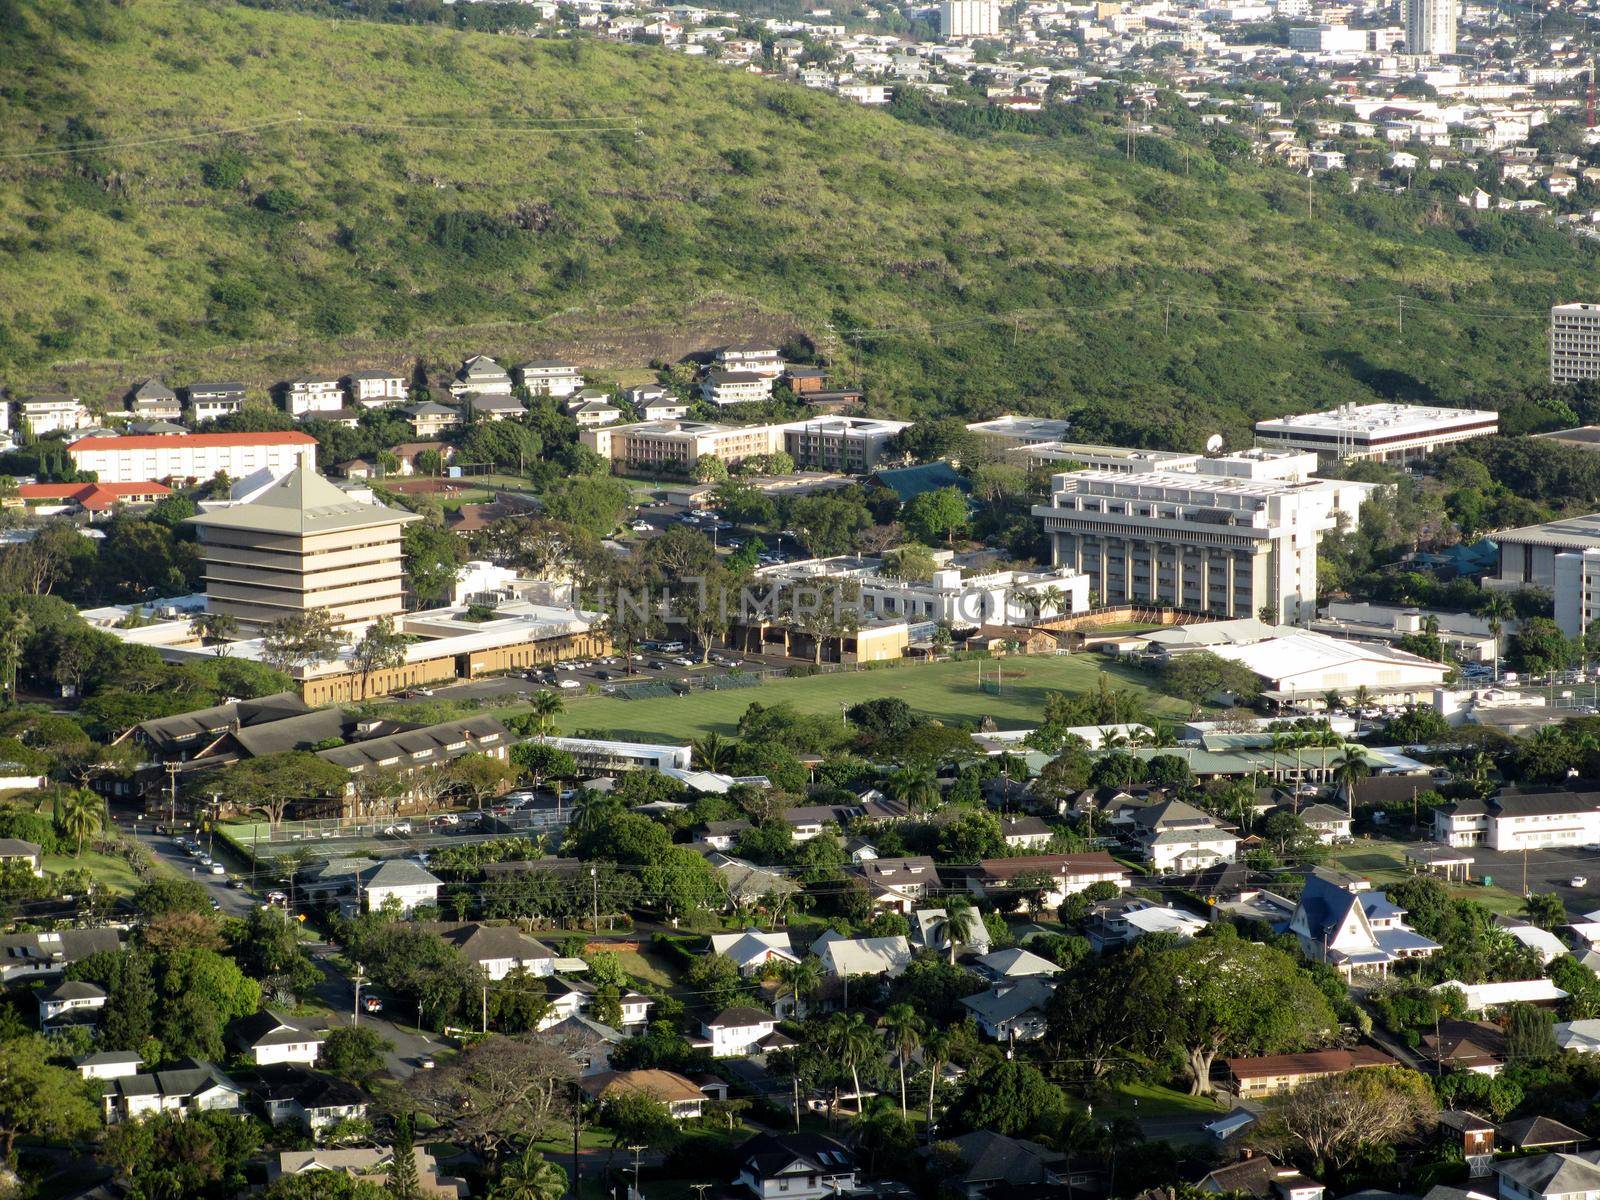 Aerial view of Landmark Mid Pacific institute, University of Hawaii, and surround neighborhood by EricGBVD